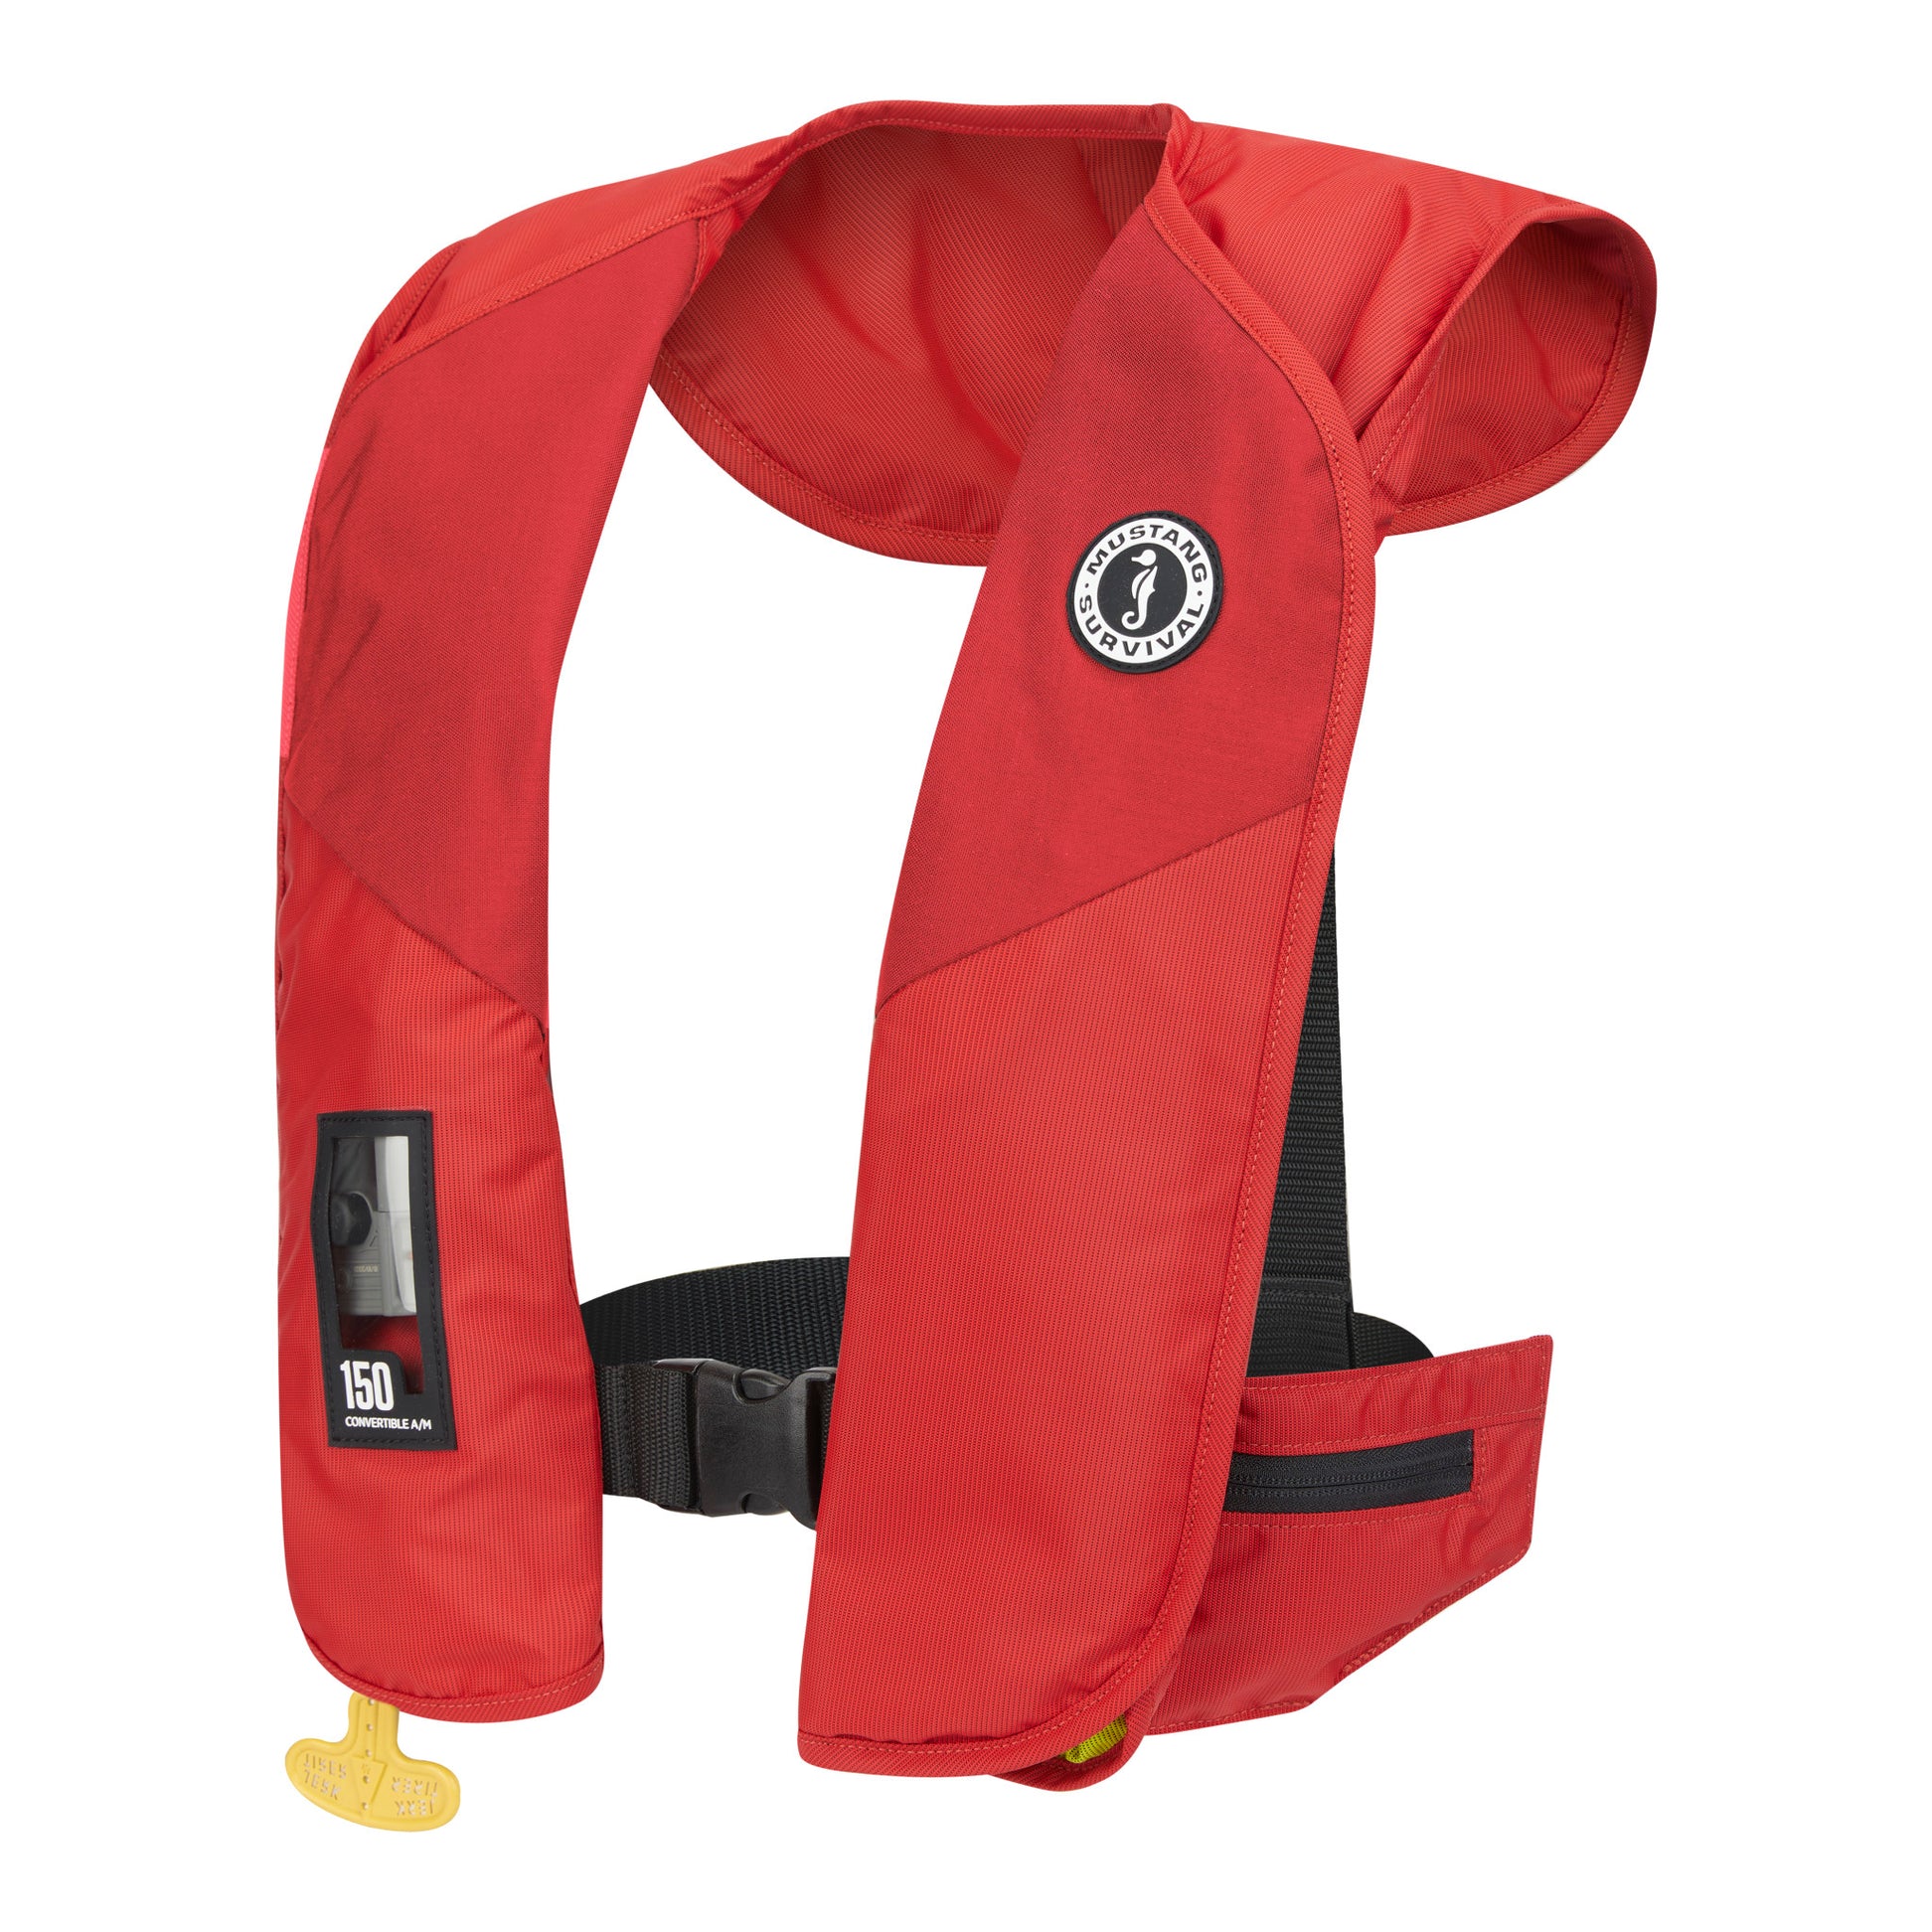 MIT 150 CONVERTIBLE A/M INFLATABLE PFD